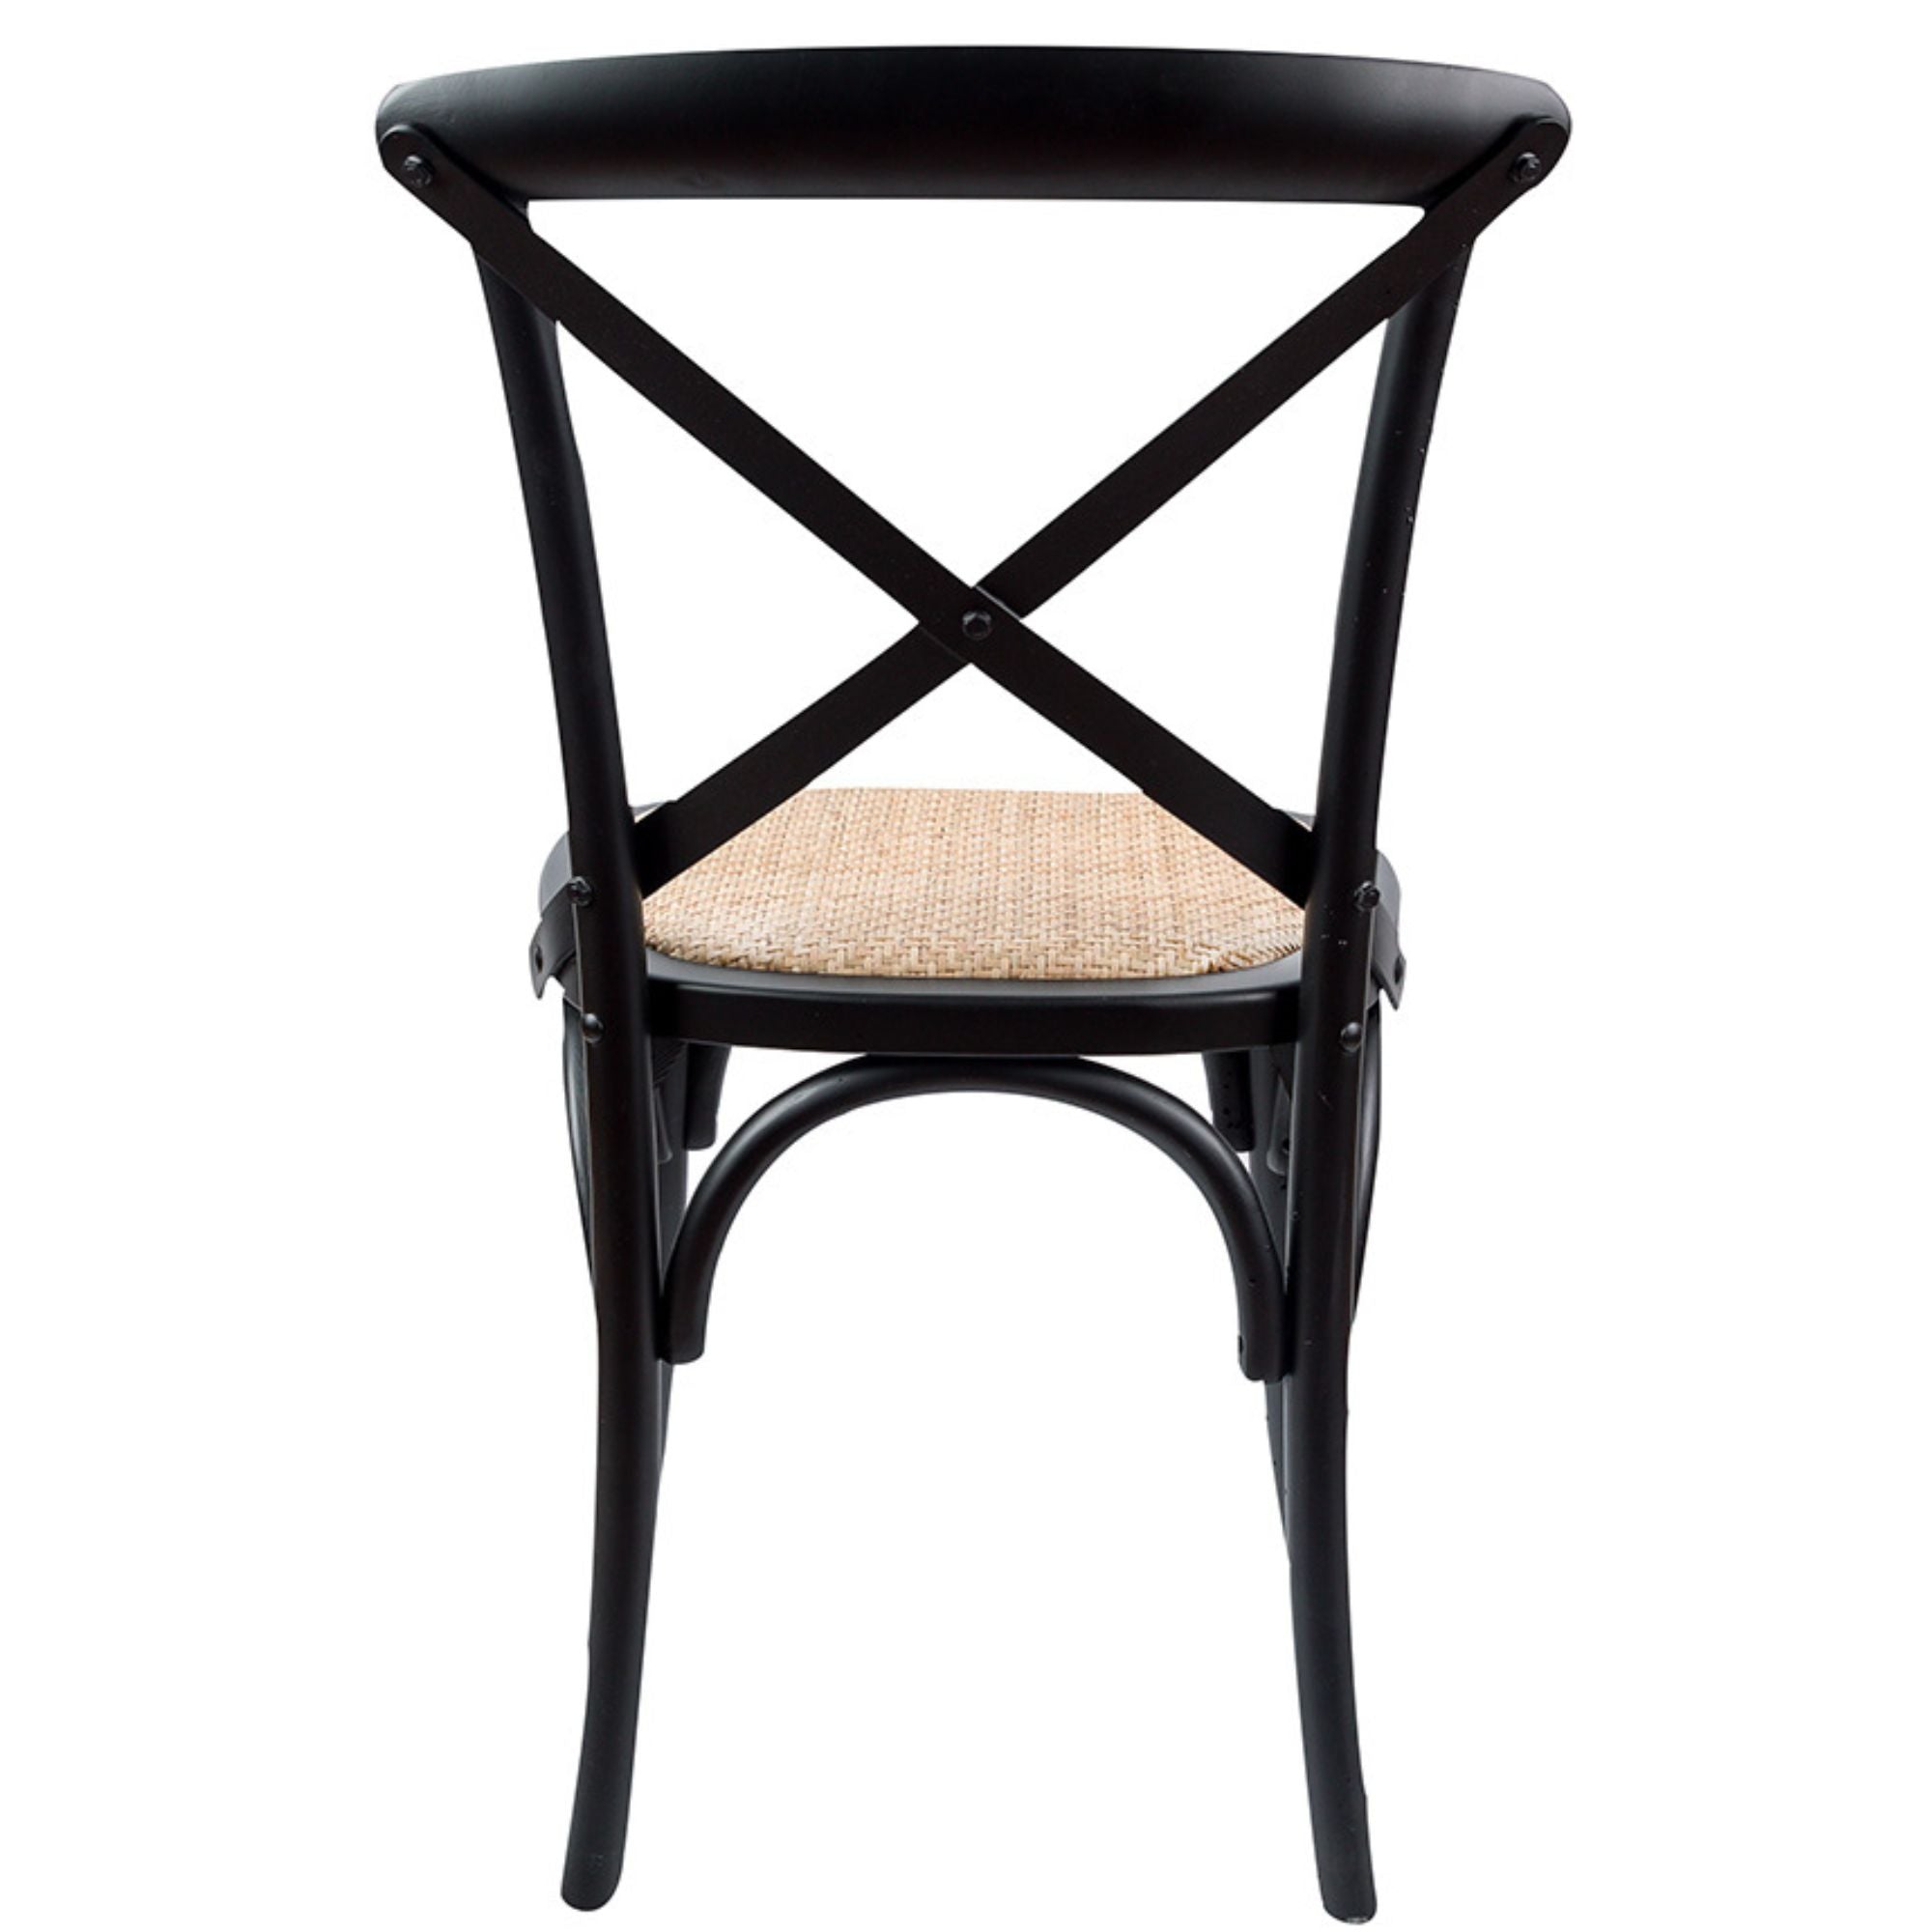 Crossback Dining Chair Set Of 4 Solid Birch Timber Wood Ratan Seat - Black